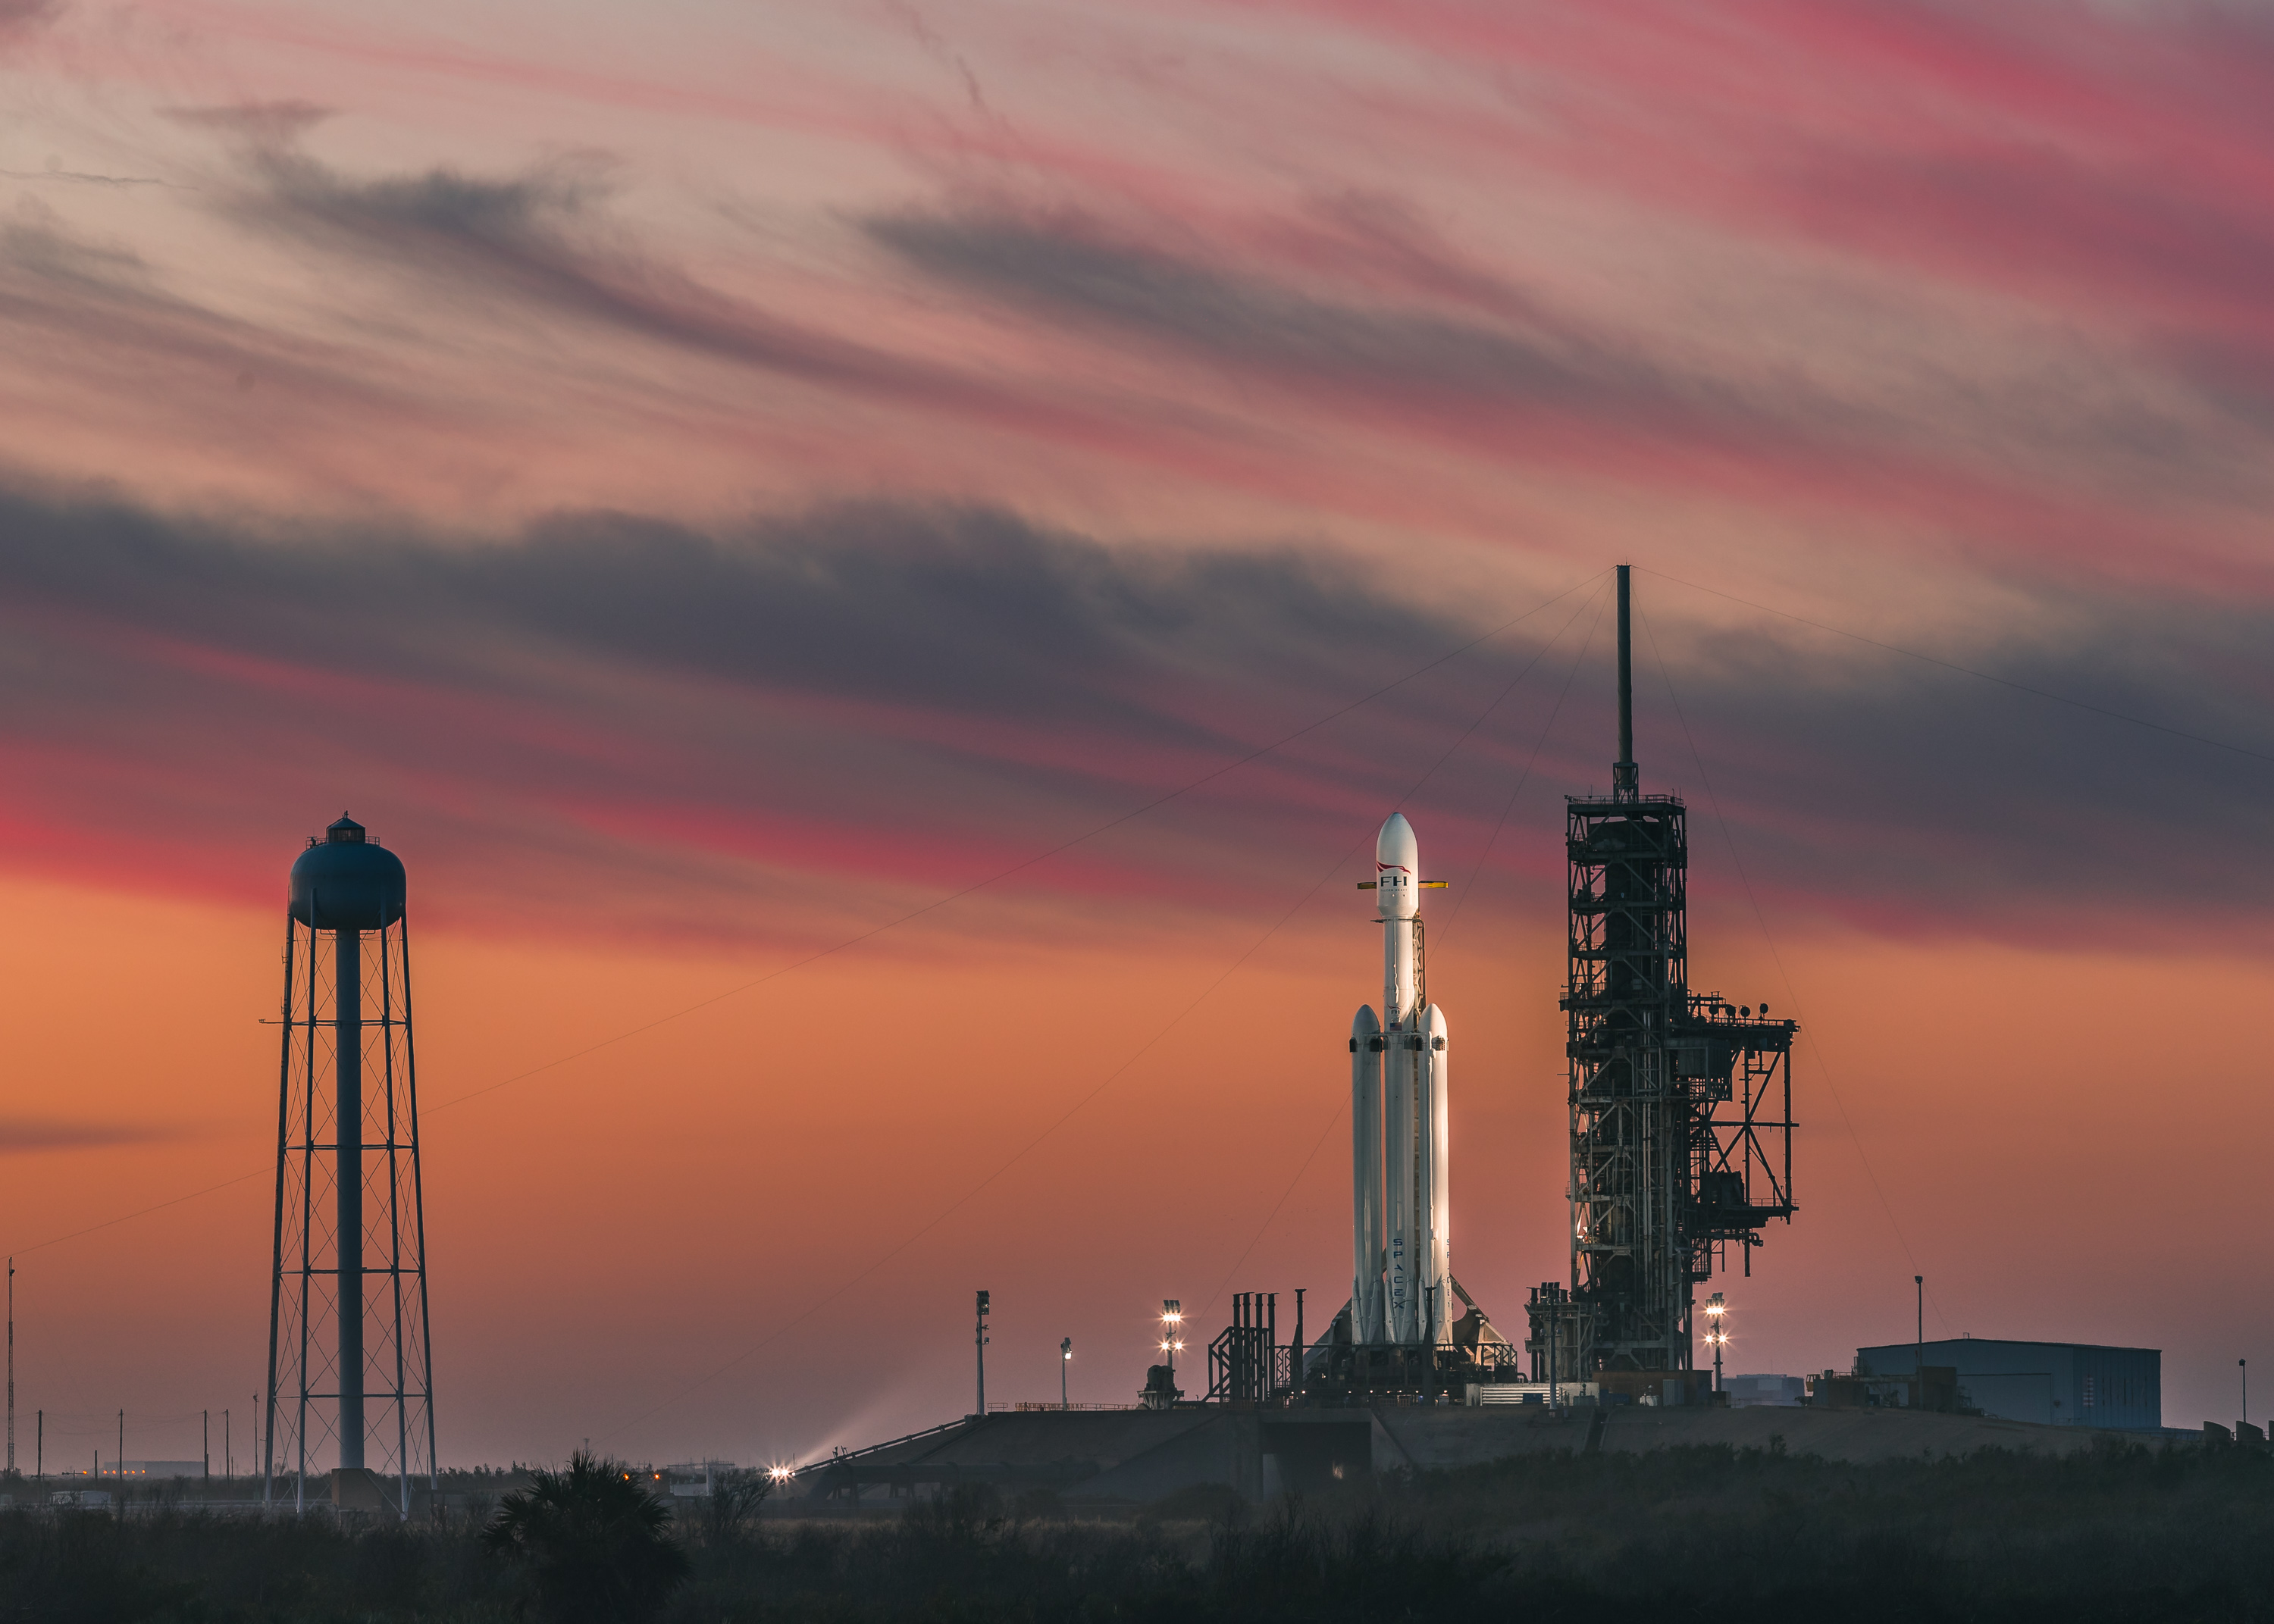 spacex, launching pad, sunset, rocket, falcon heavy, technology iphone wallpaper